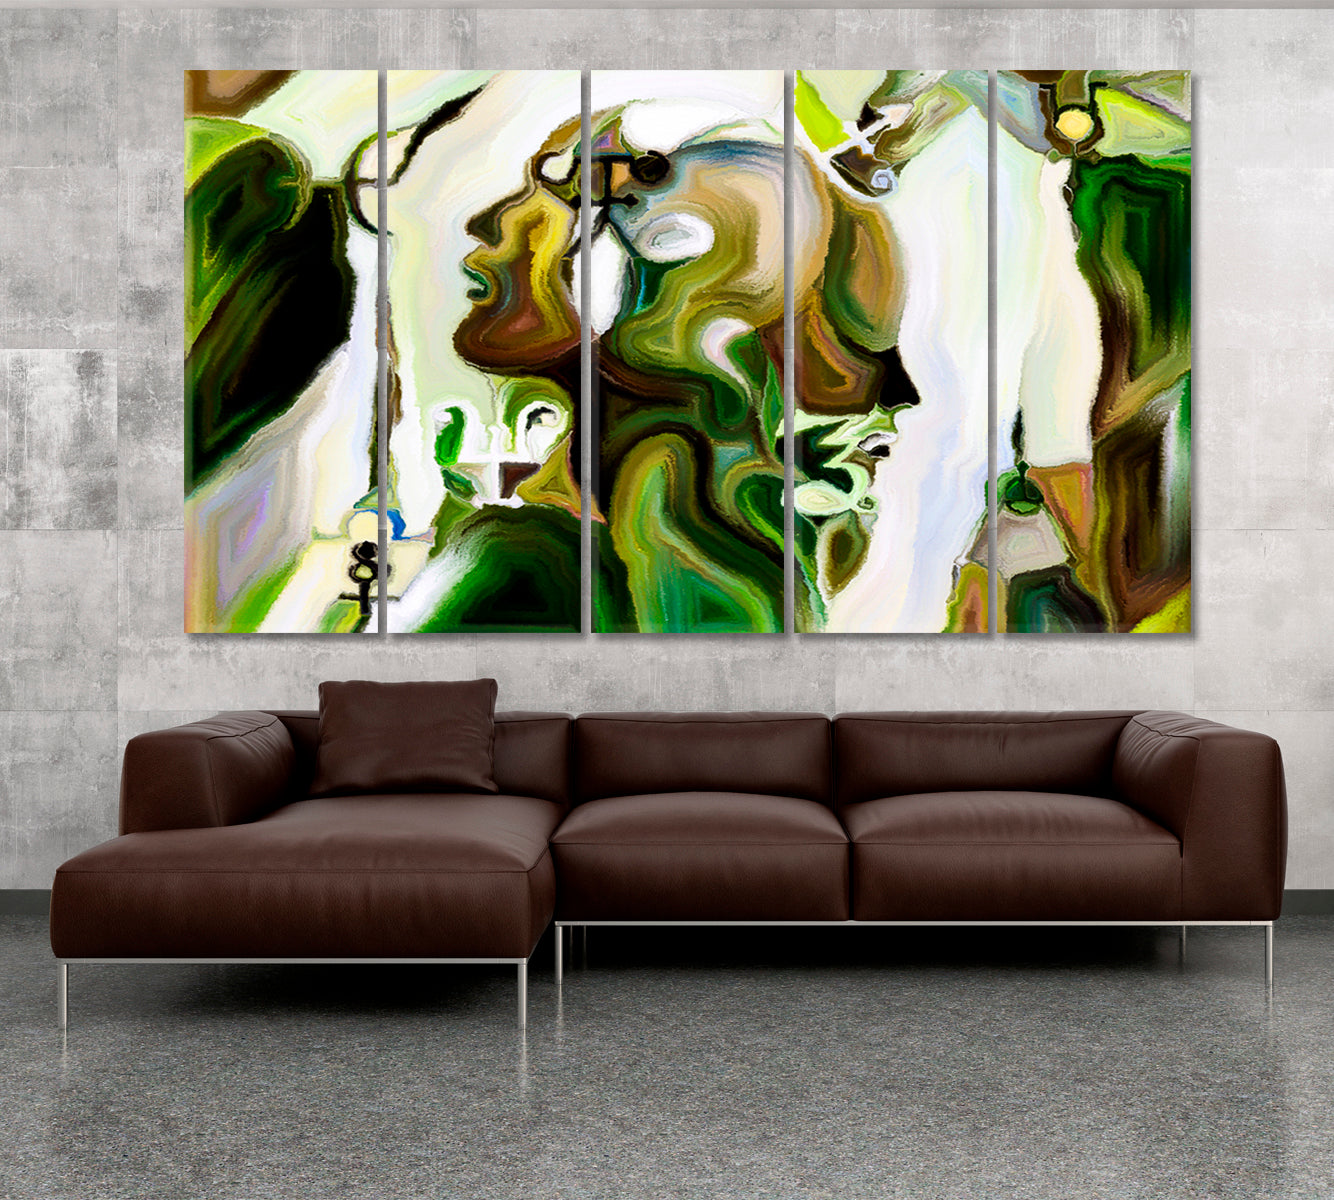 Mystic Knowledge Abstraction Consciousness Art Artesty 5 panels 36" x 24" 